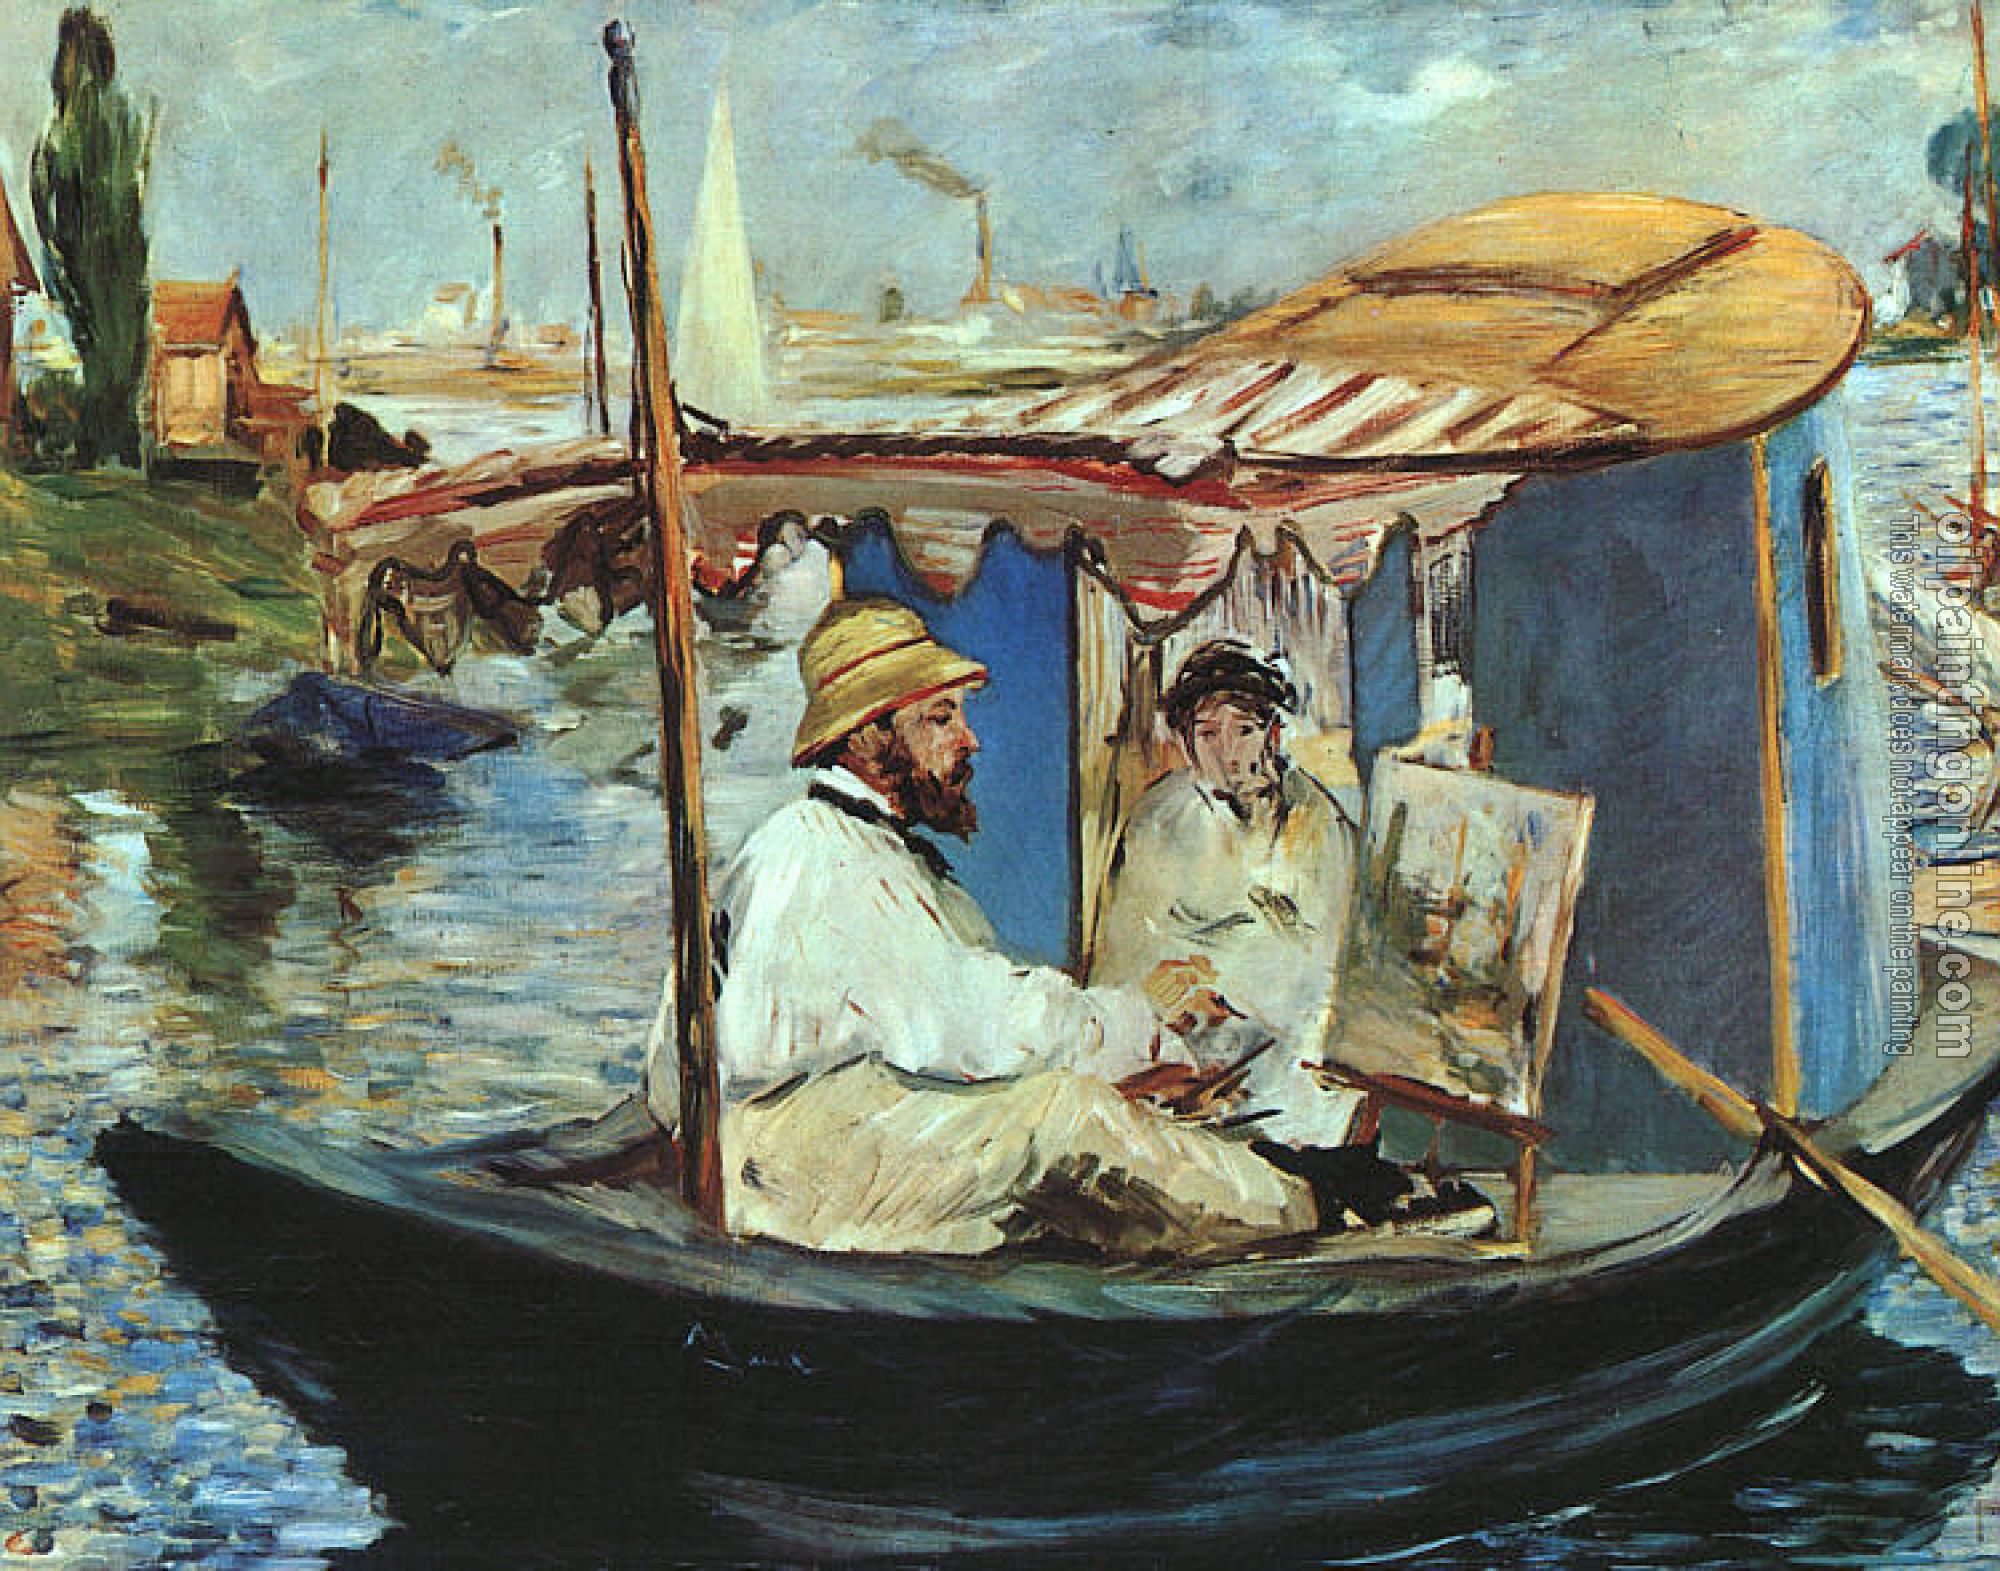 Manet, Edouard - Claude Monet working on his boat in Argenteuil